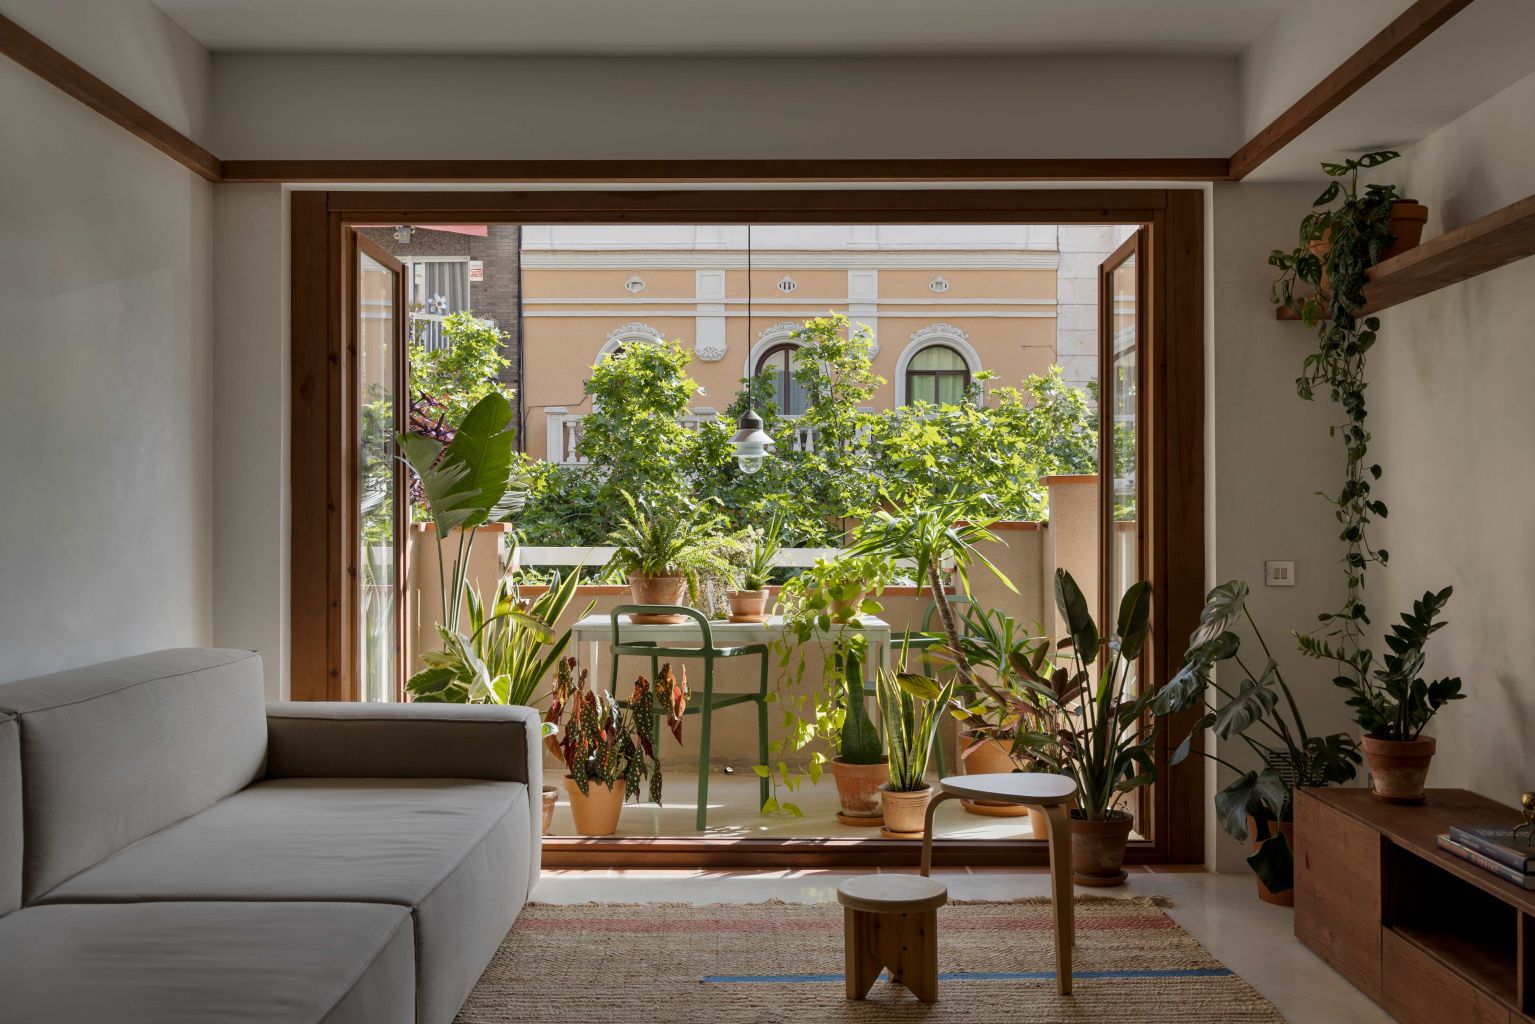 FULL RENOVATION OF A FLAT IN EIXAMPLE